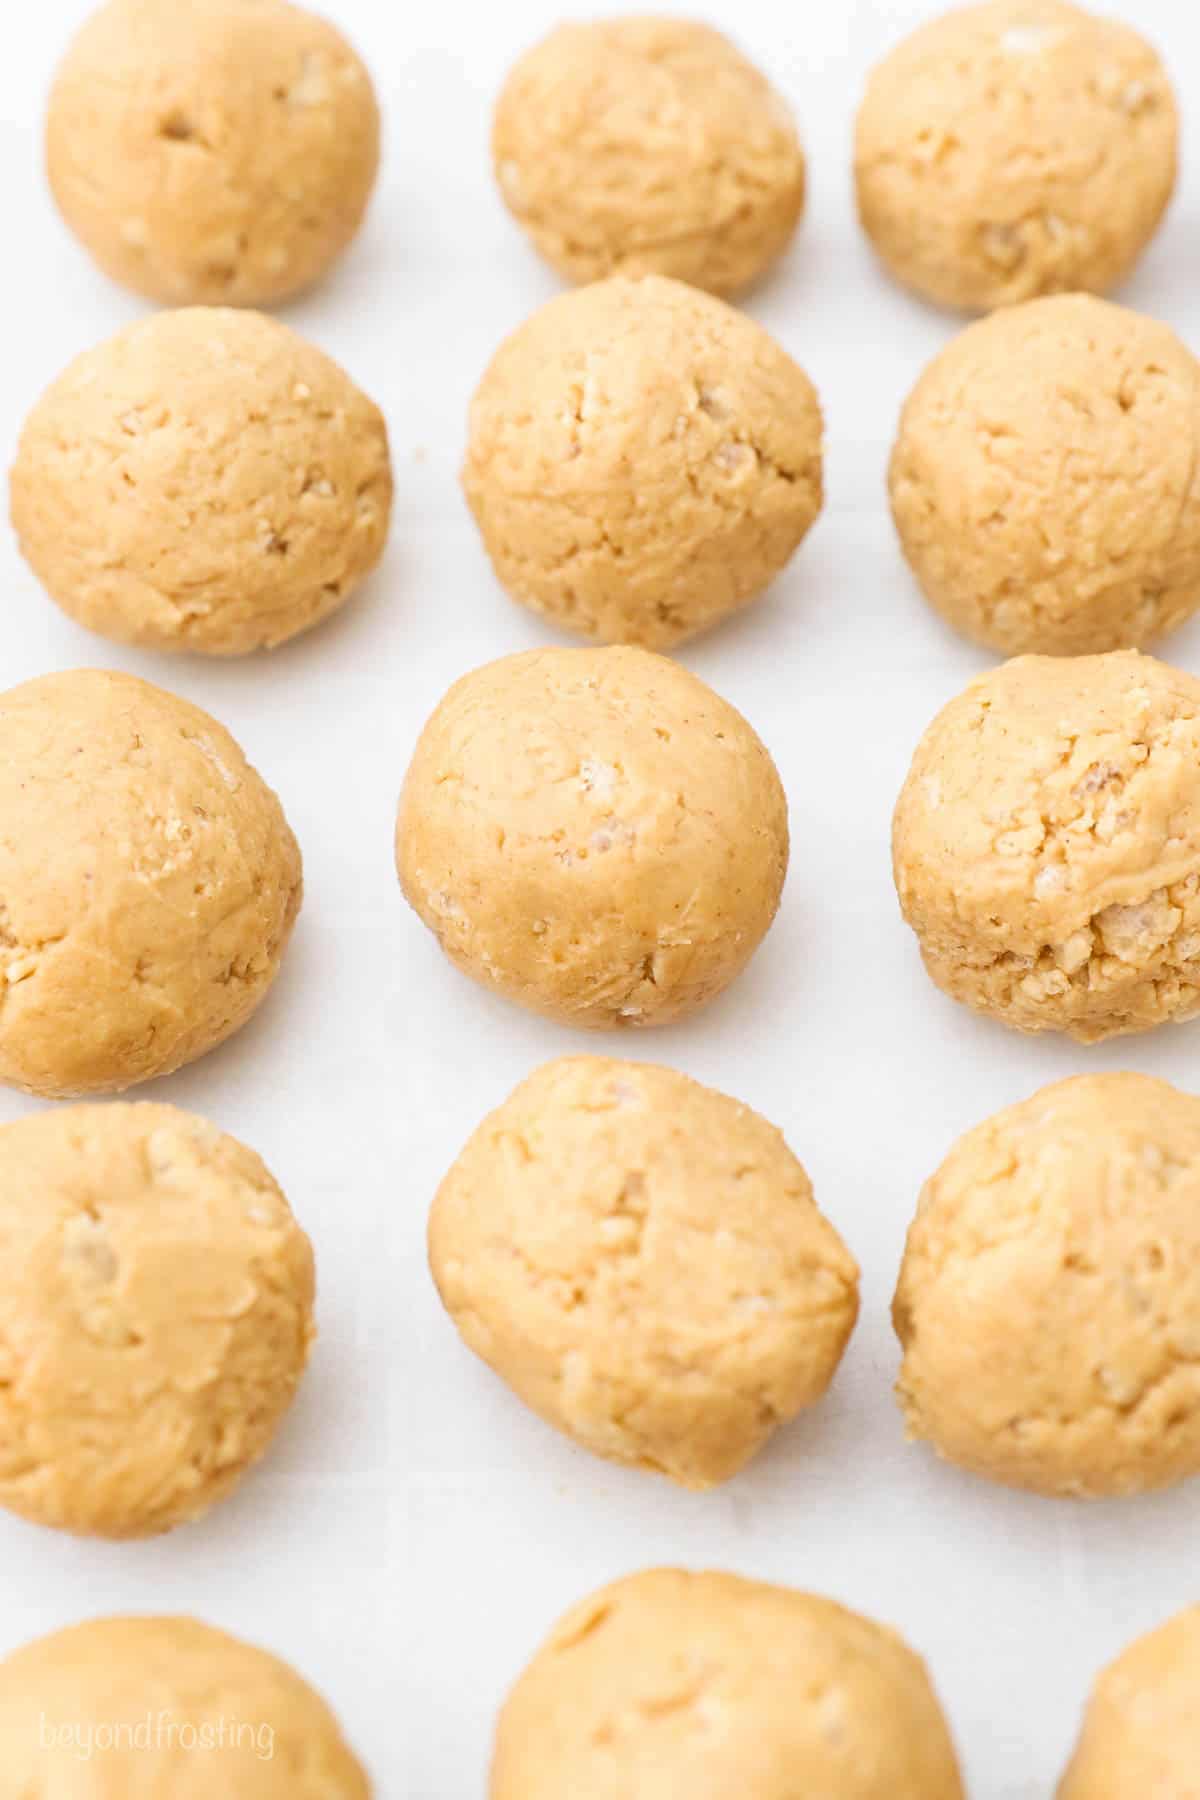 Fifteen uncoated peanut butter truffles on a baking sheet lined with parchment paper